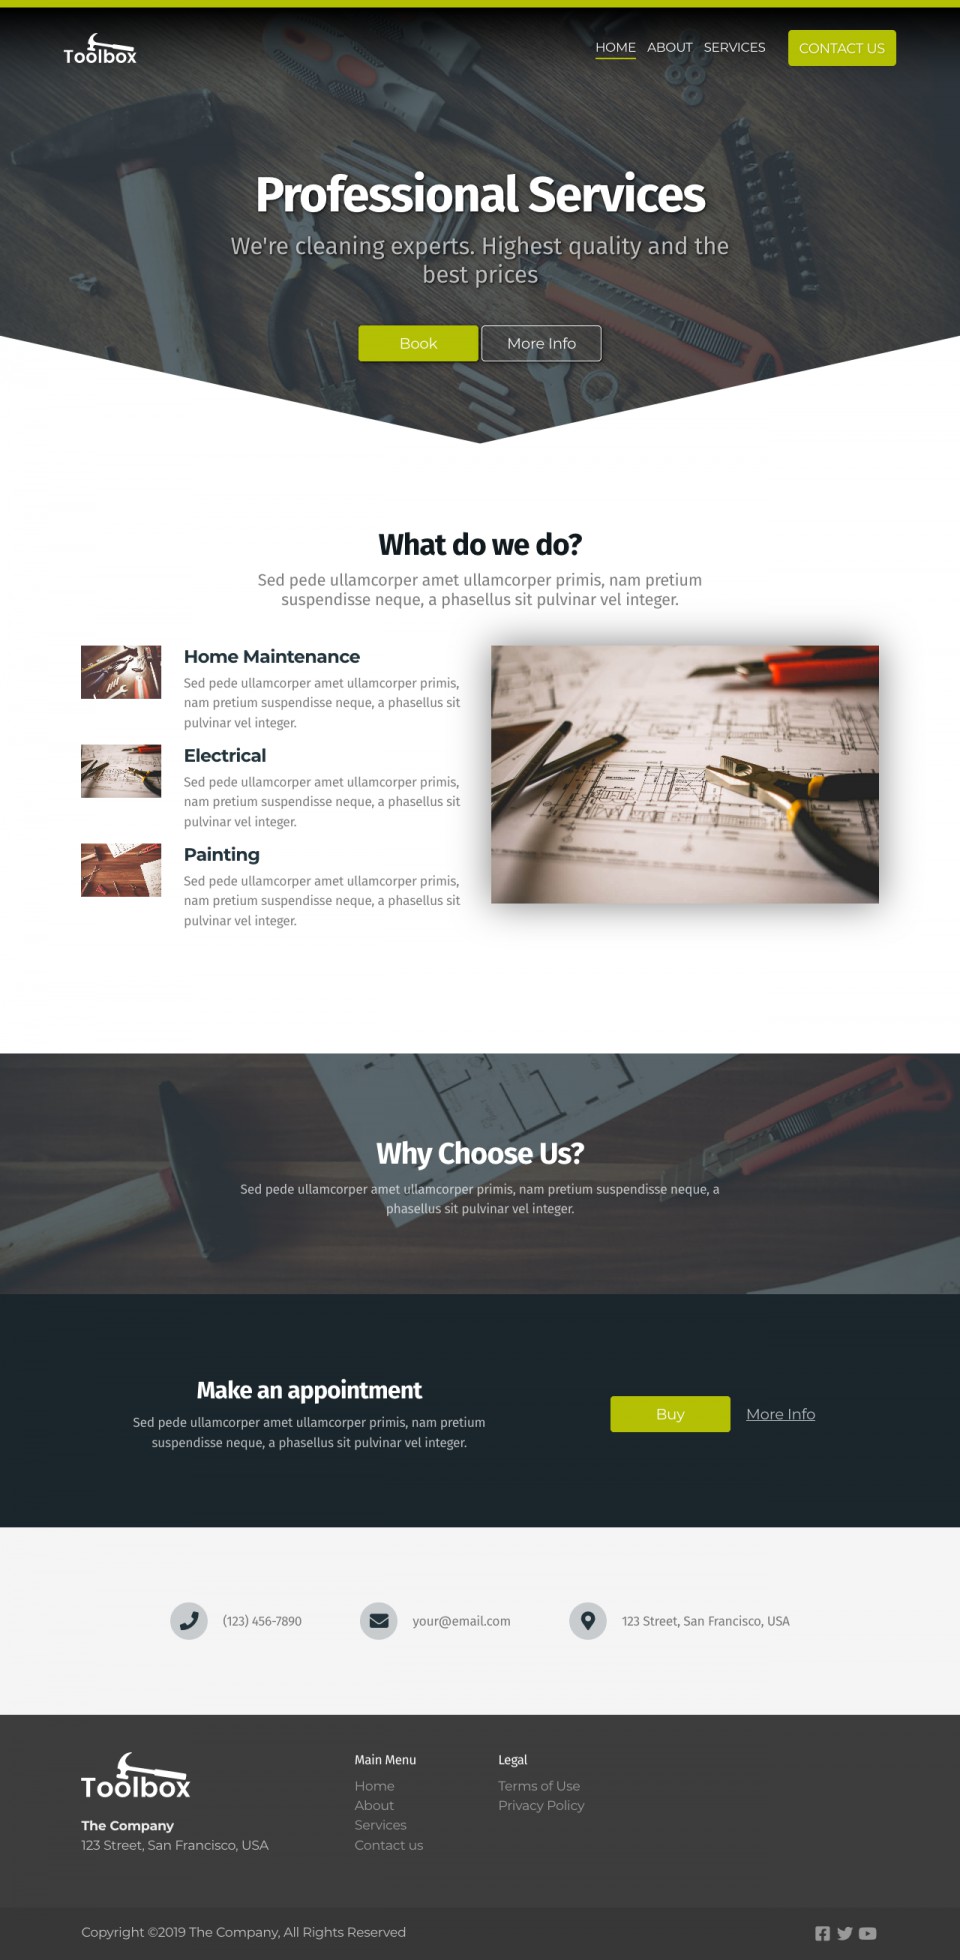 Toolbox Website Template - Ideal for small businesses in the handyman, repair, tools, and home maintenance industries.